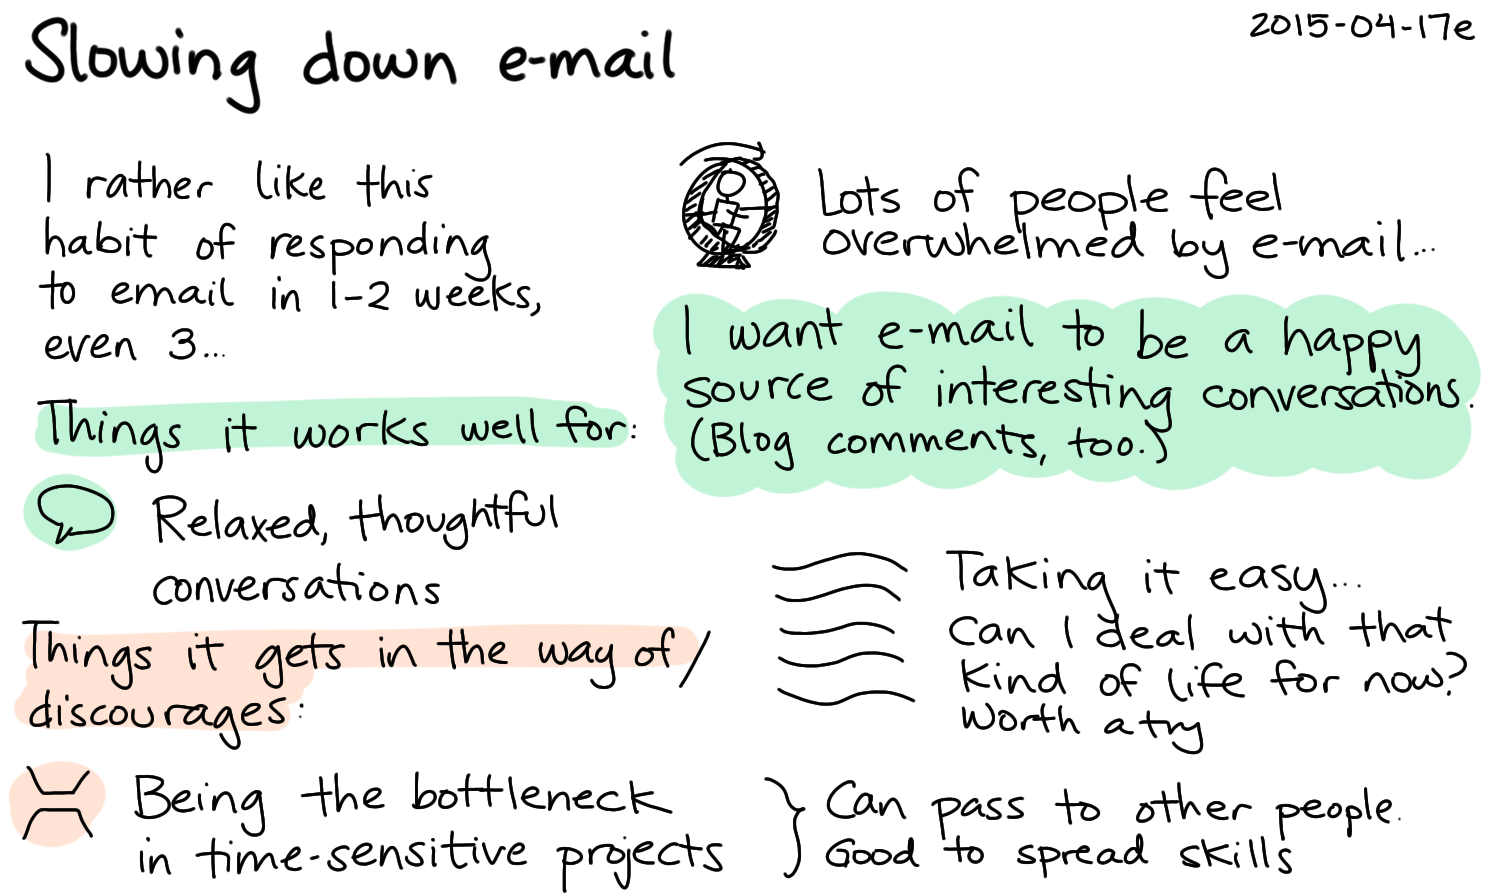 2015-04-17e Slowing down e-mail -- index card #email #slow #relax #experiment #semi-retirement.png